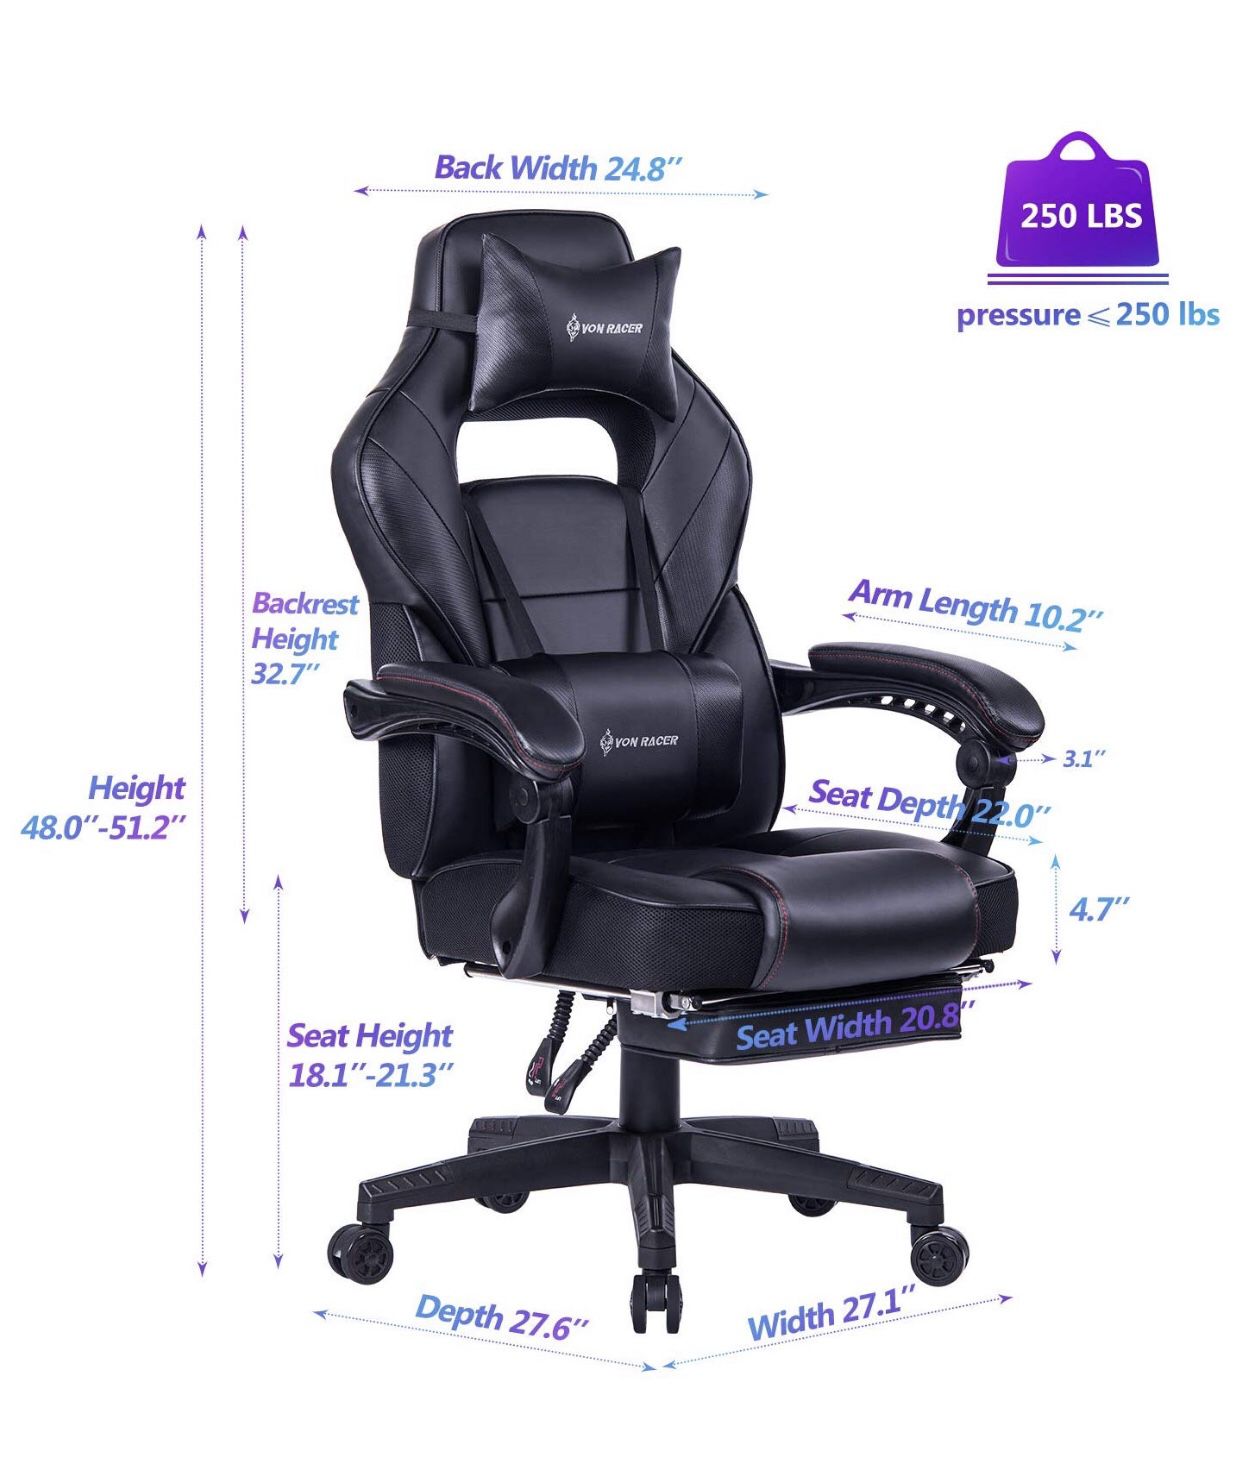 Brand new gaming / computer chair